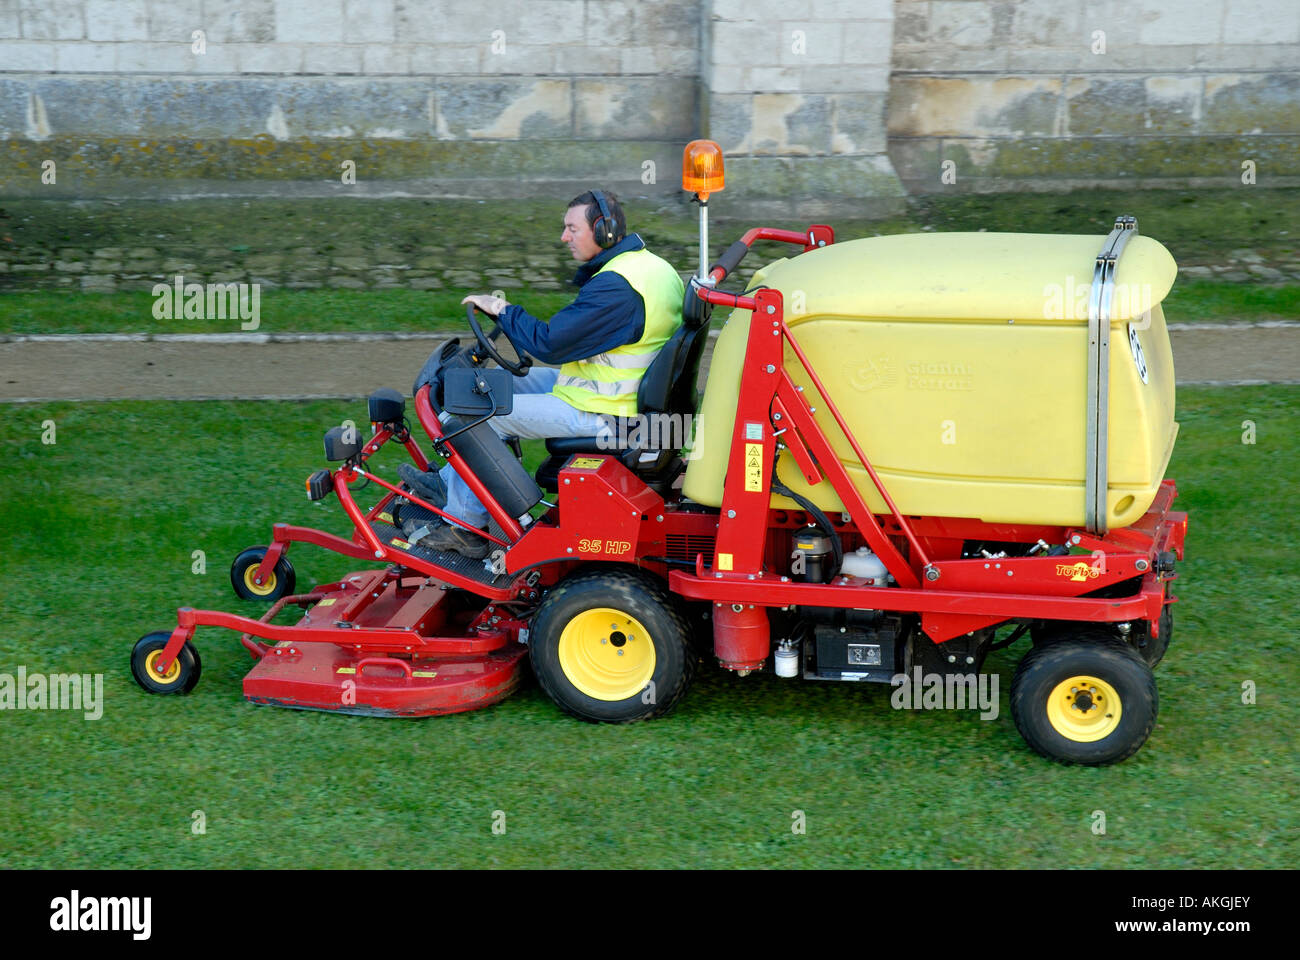 Industrial grass mower, France. Stock Photo